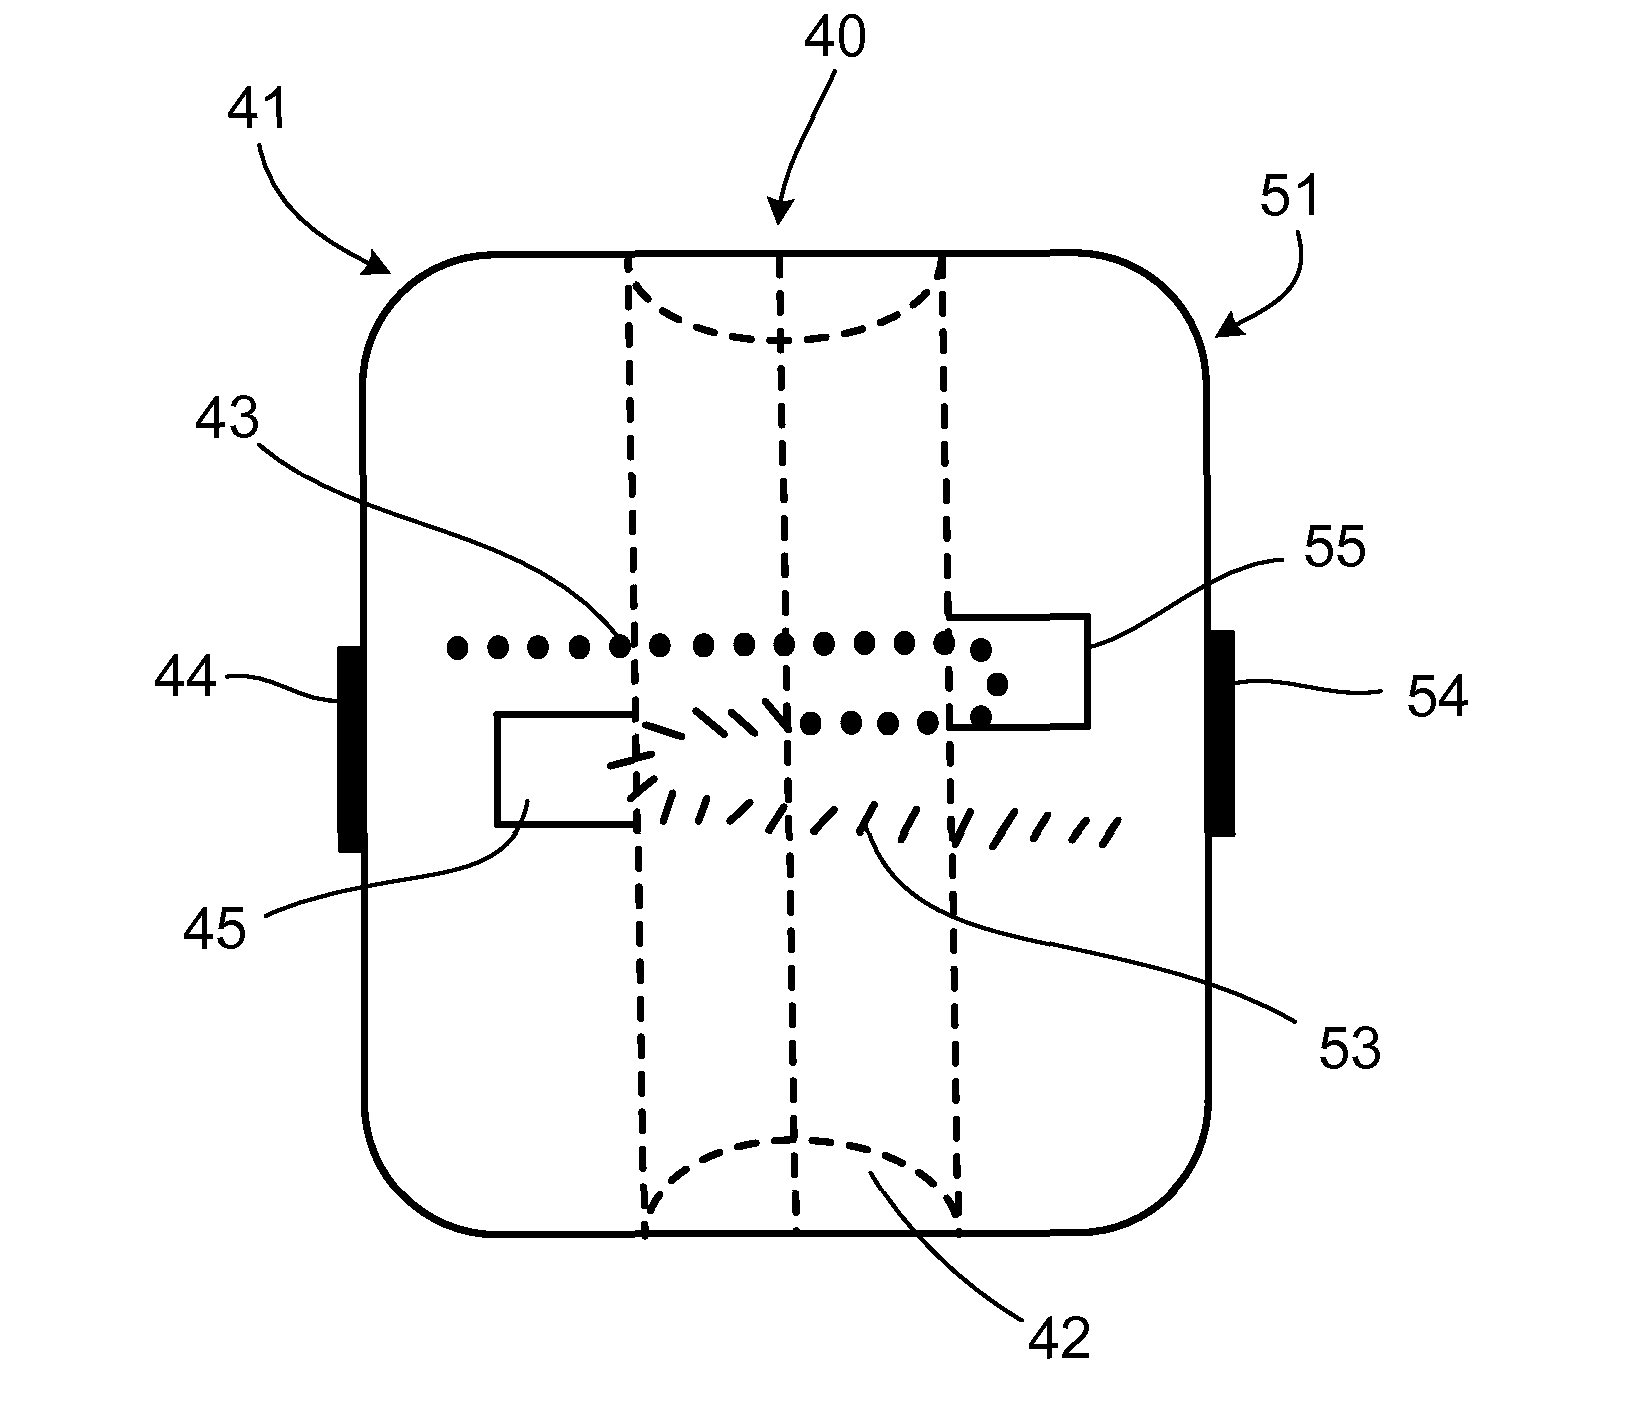 Urethral catheter tension holding and movement stabilizing devices